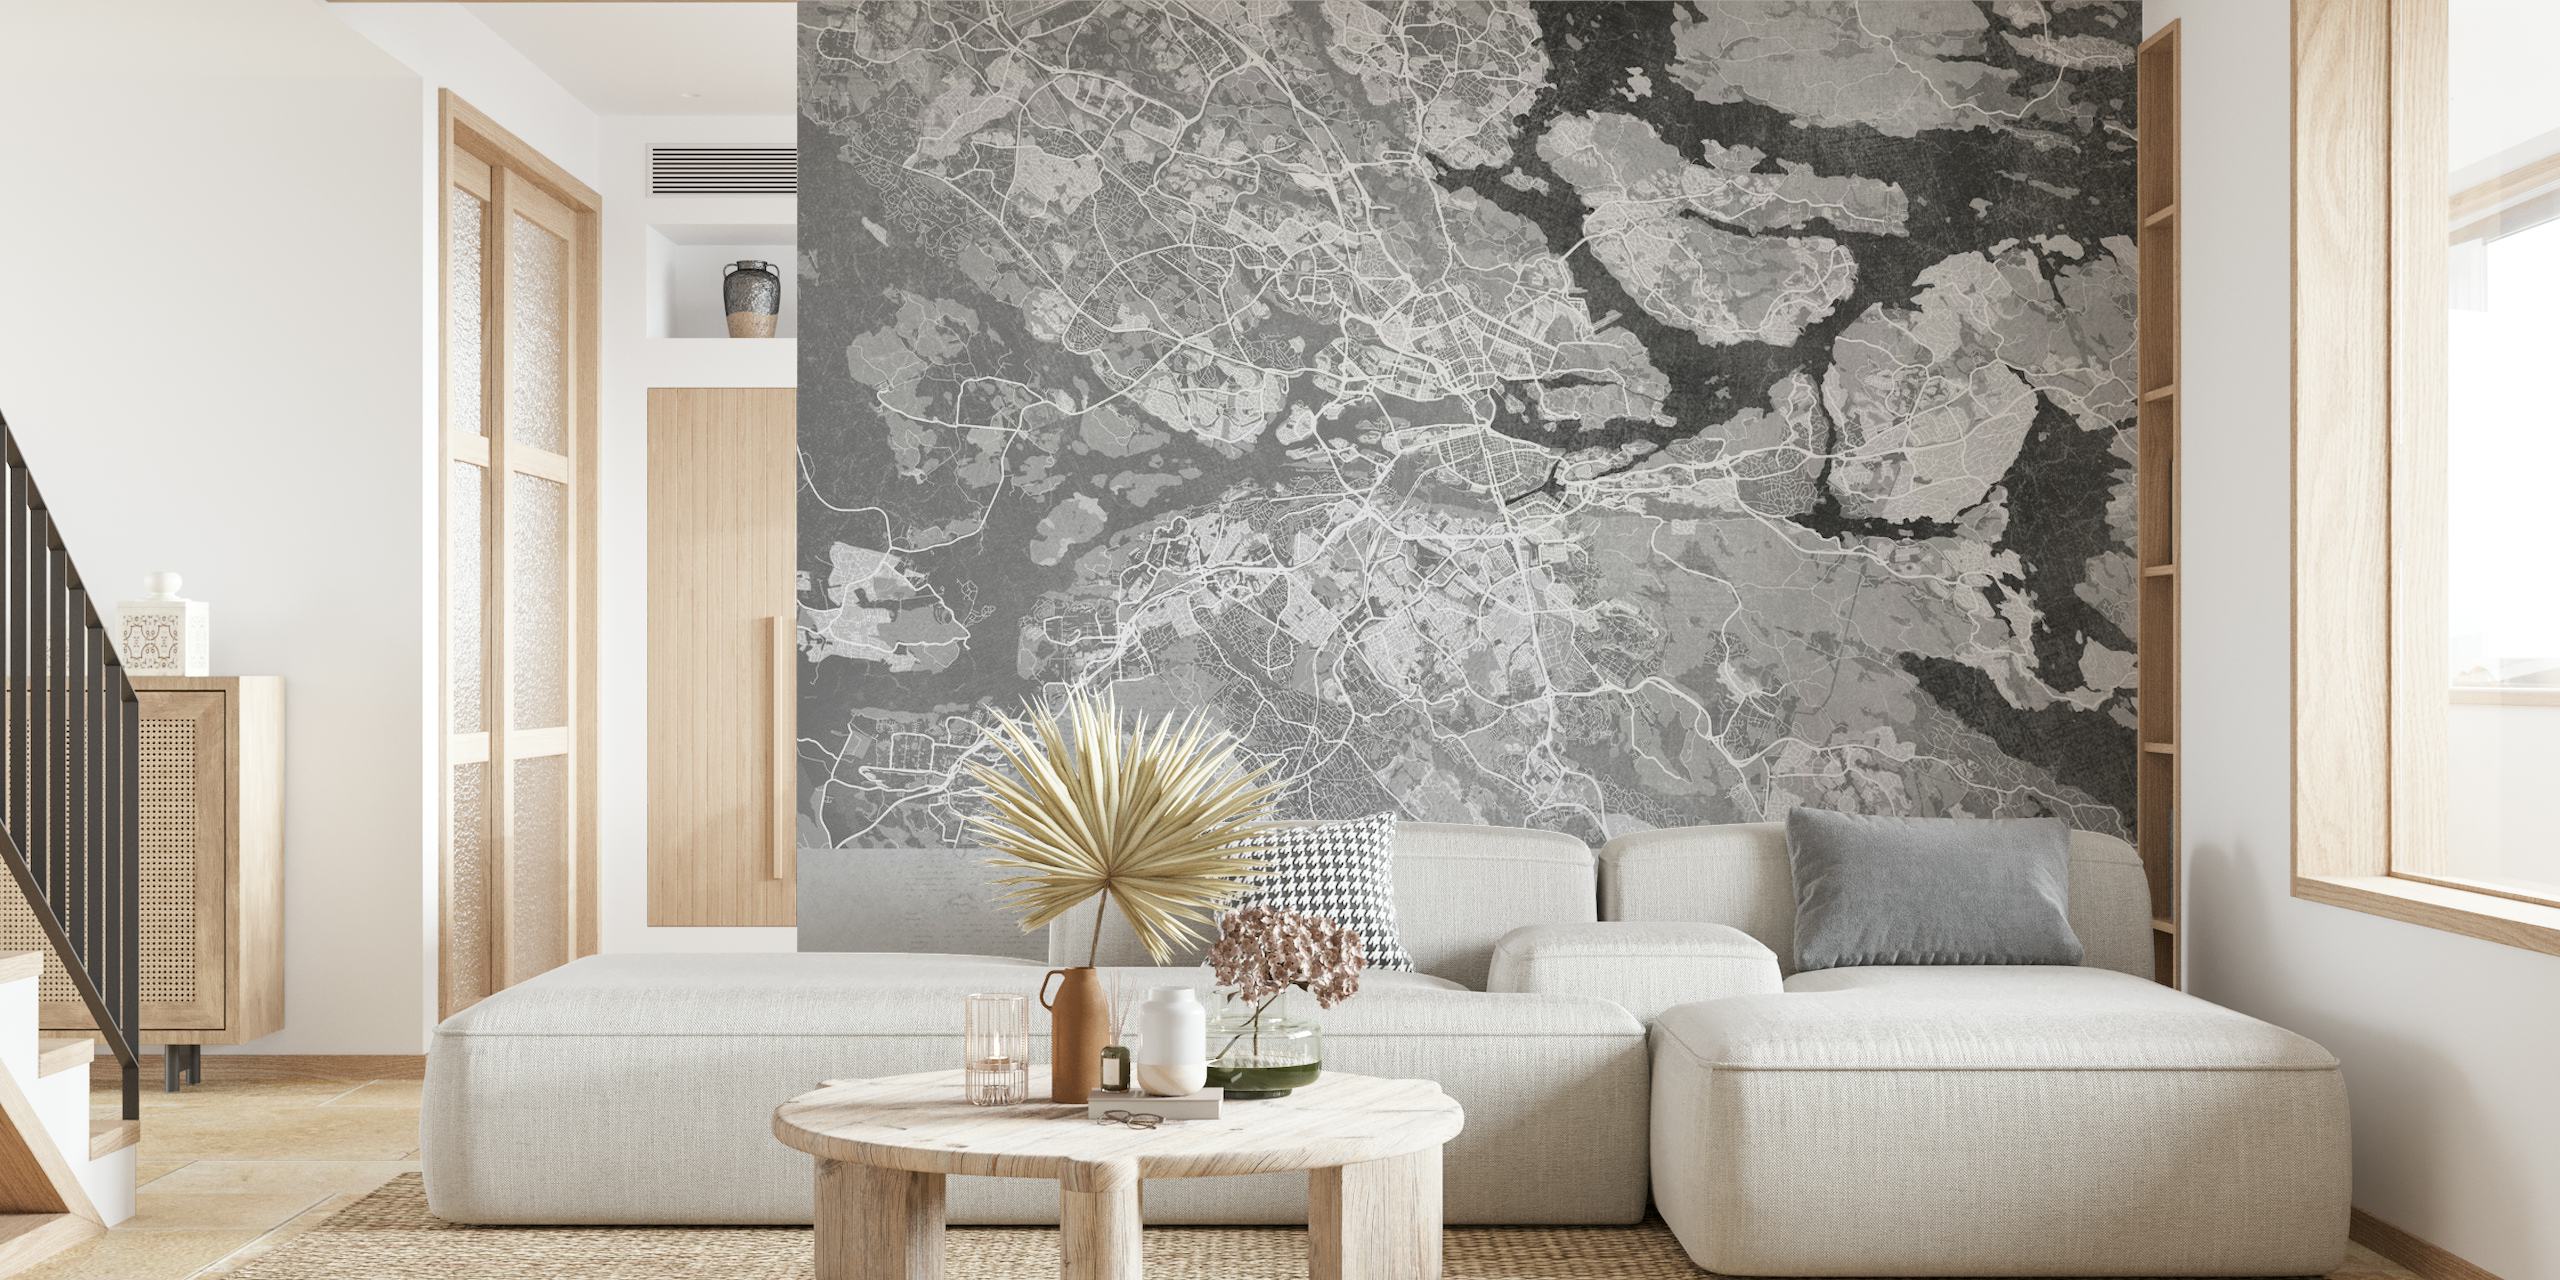 Stockholm gray vintage style map wall mural for interior decor